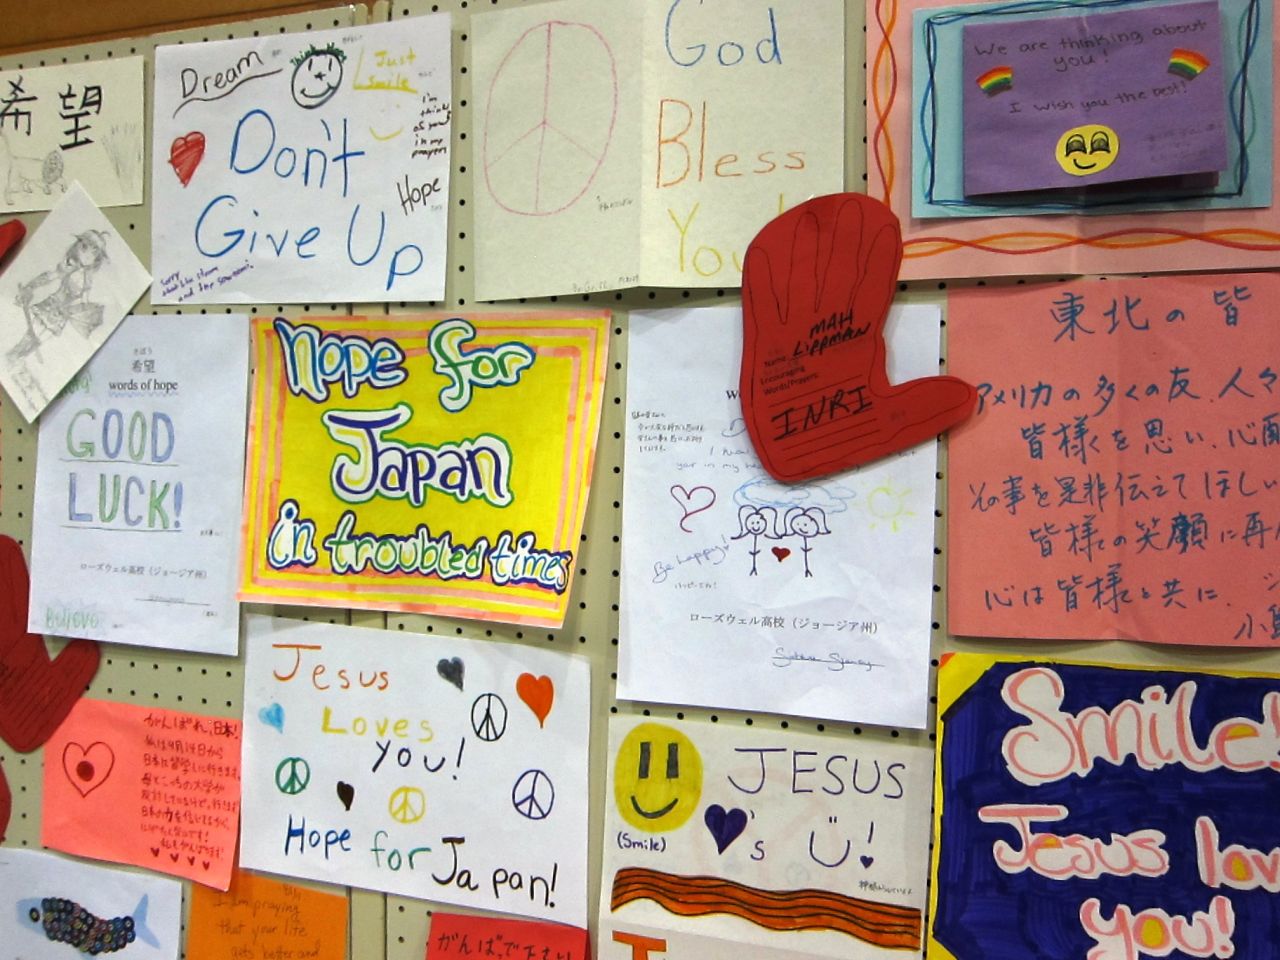 During the "Words of Hope for Japan" campaign launched by Kathleen Koch, hundreds of volunteers translated thousands of letters sent to earthquake and tsunami victims in Japan.  This bulletin board full of letters was posted at a surprise concert at a school turned shelter in Minamisoma, Japan.